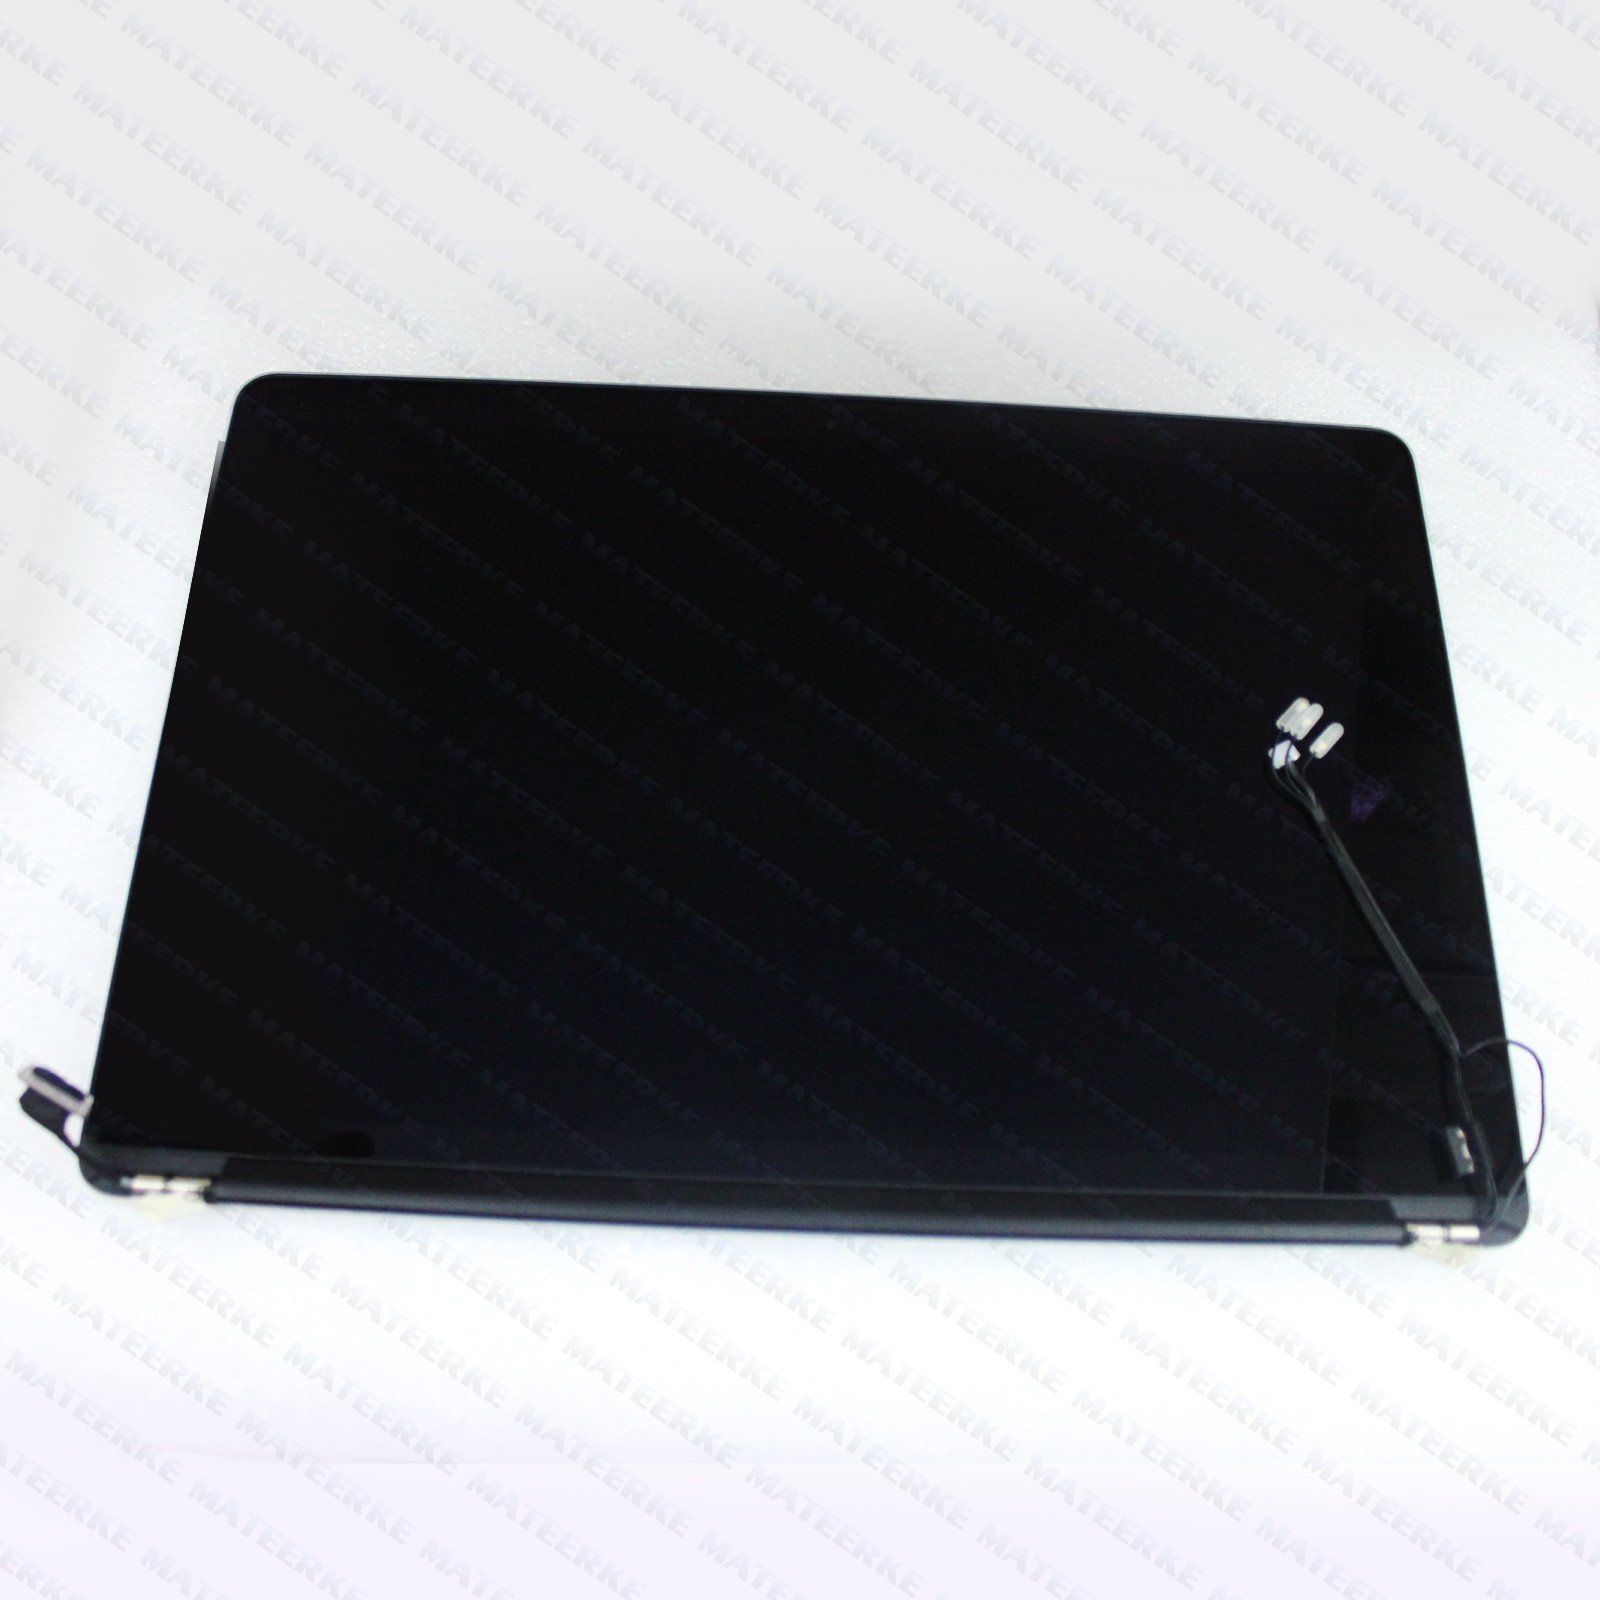 New Display Full LCD Screen Assembly For Mid 2012 MacBook Pro 15" A1398 Retina - Click Image to Close